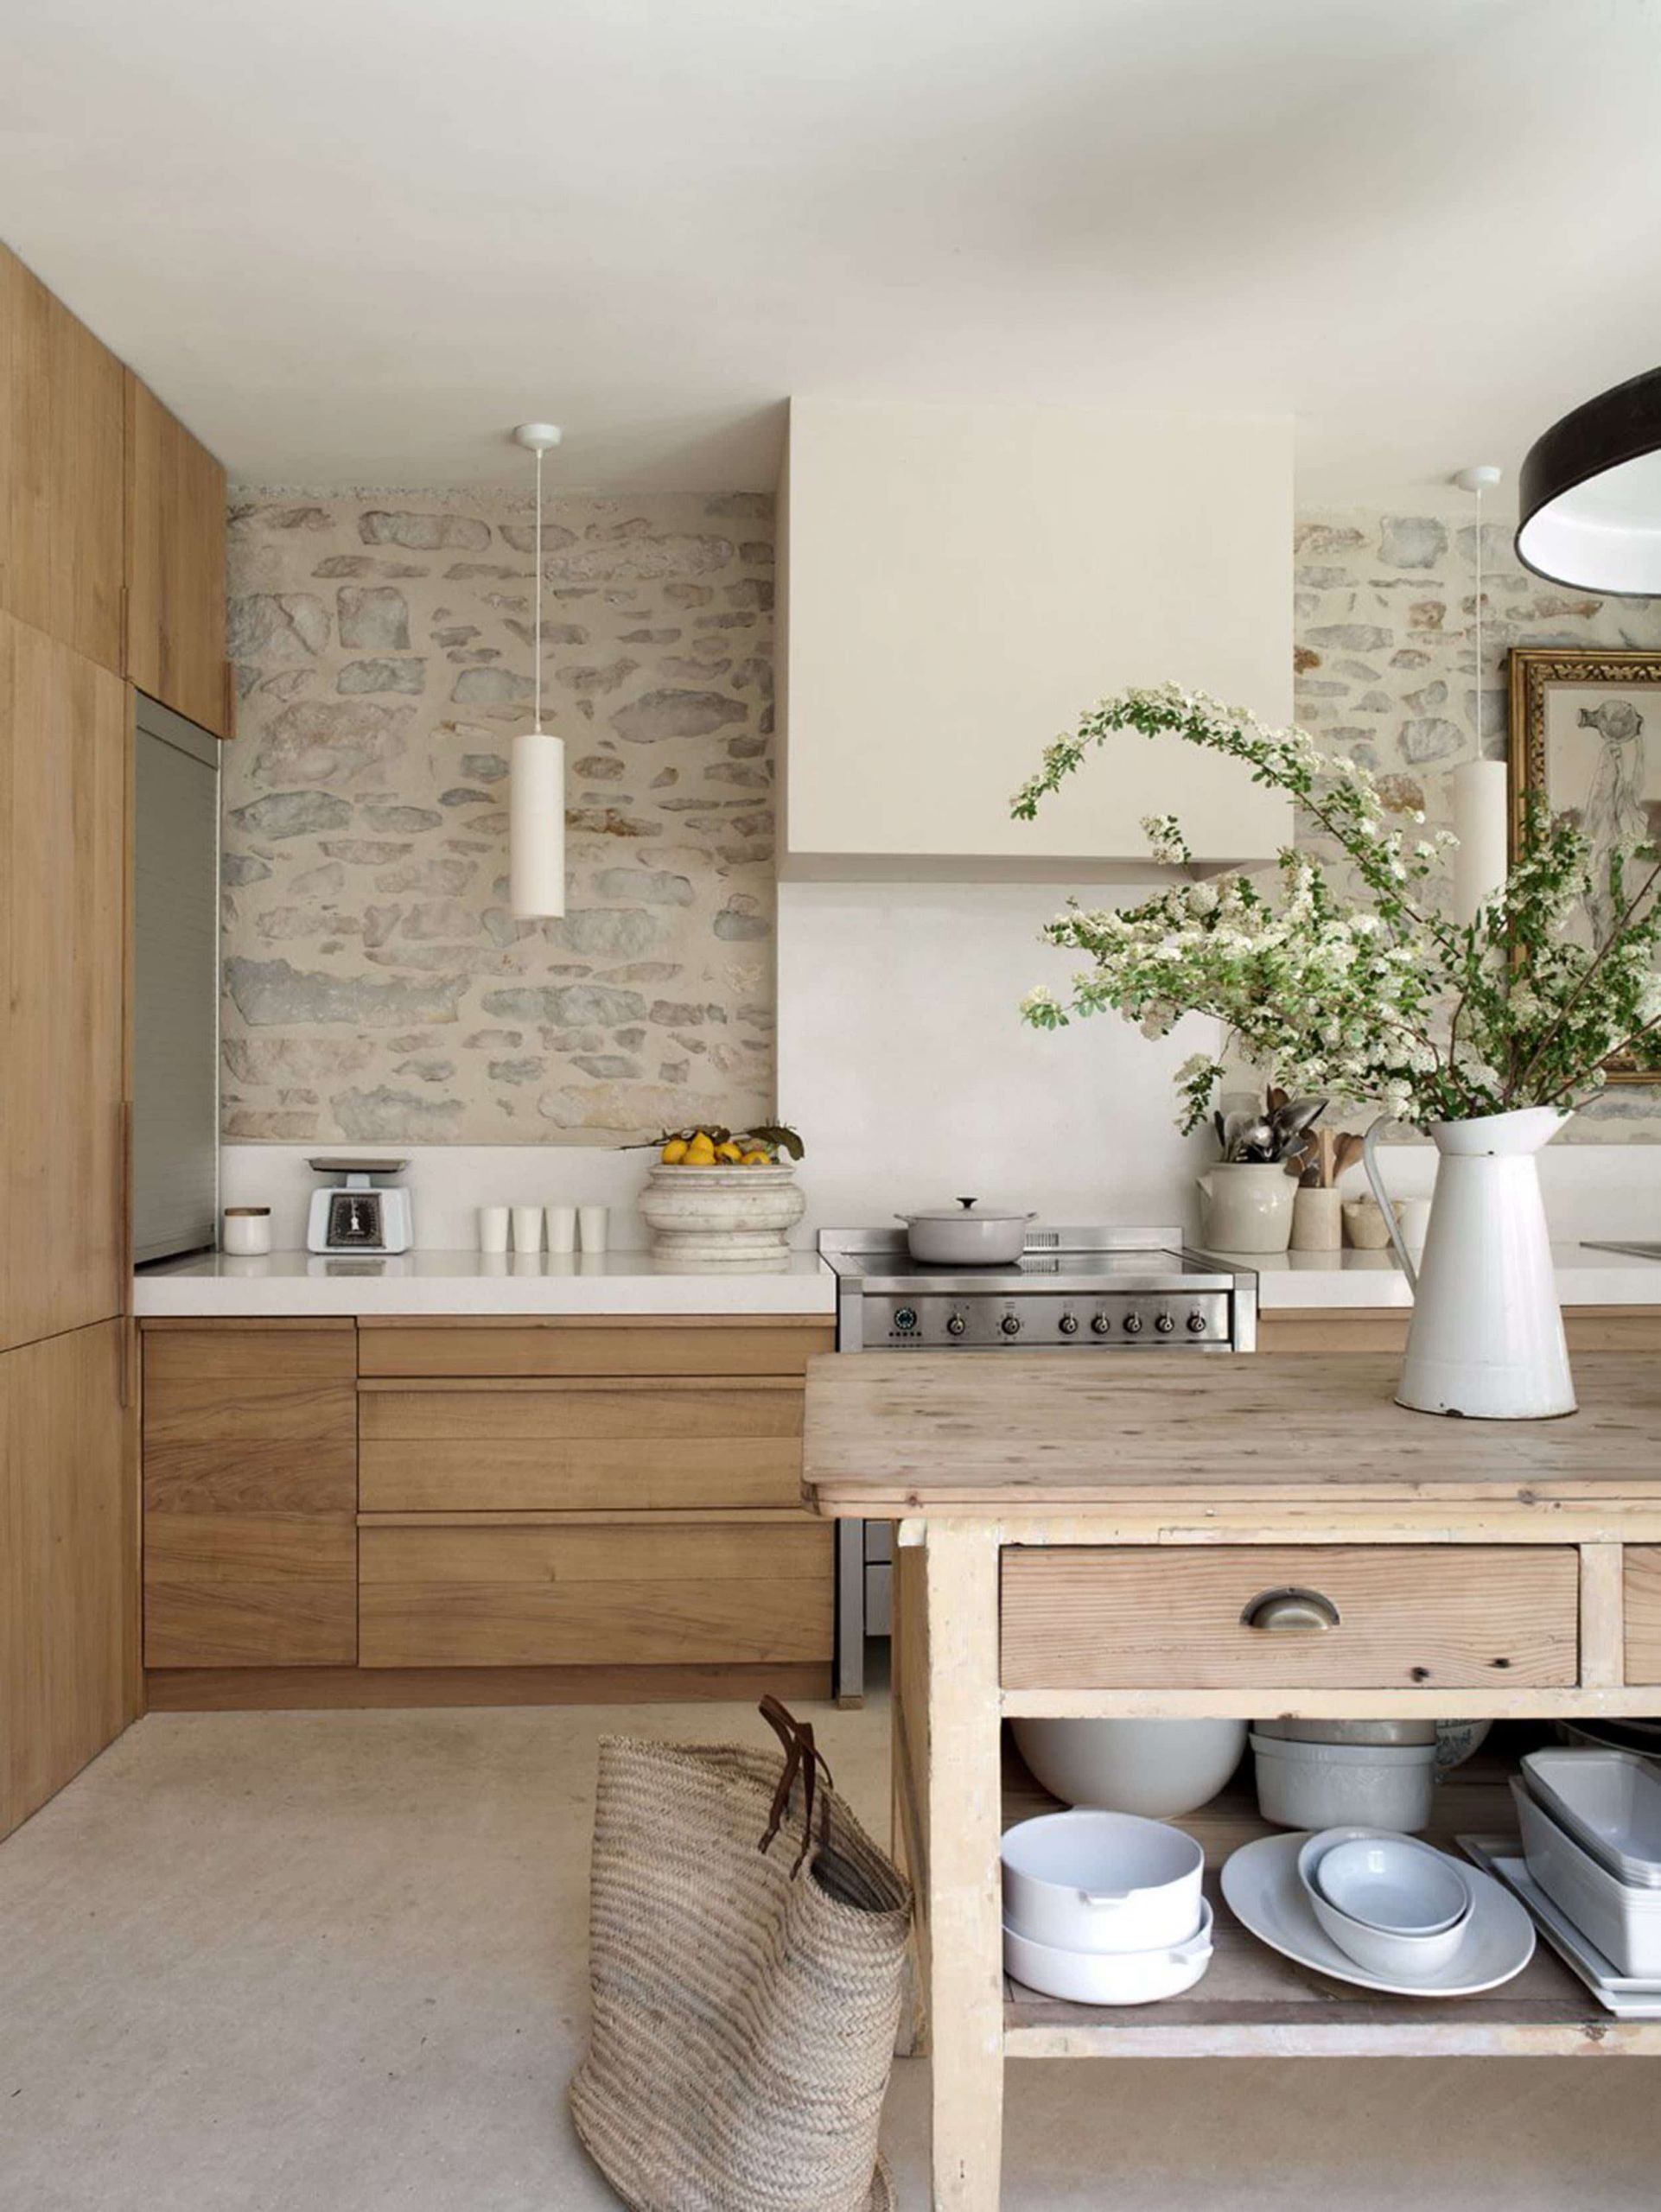 Kitchen Backsplash Ideas 2020
 The 9 Kitchen Trends We Can t Wait to See More of In 2020